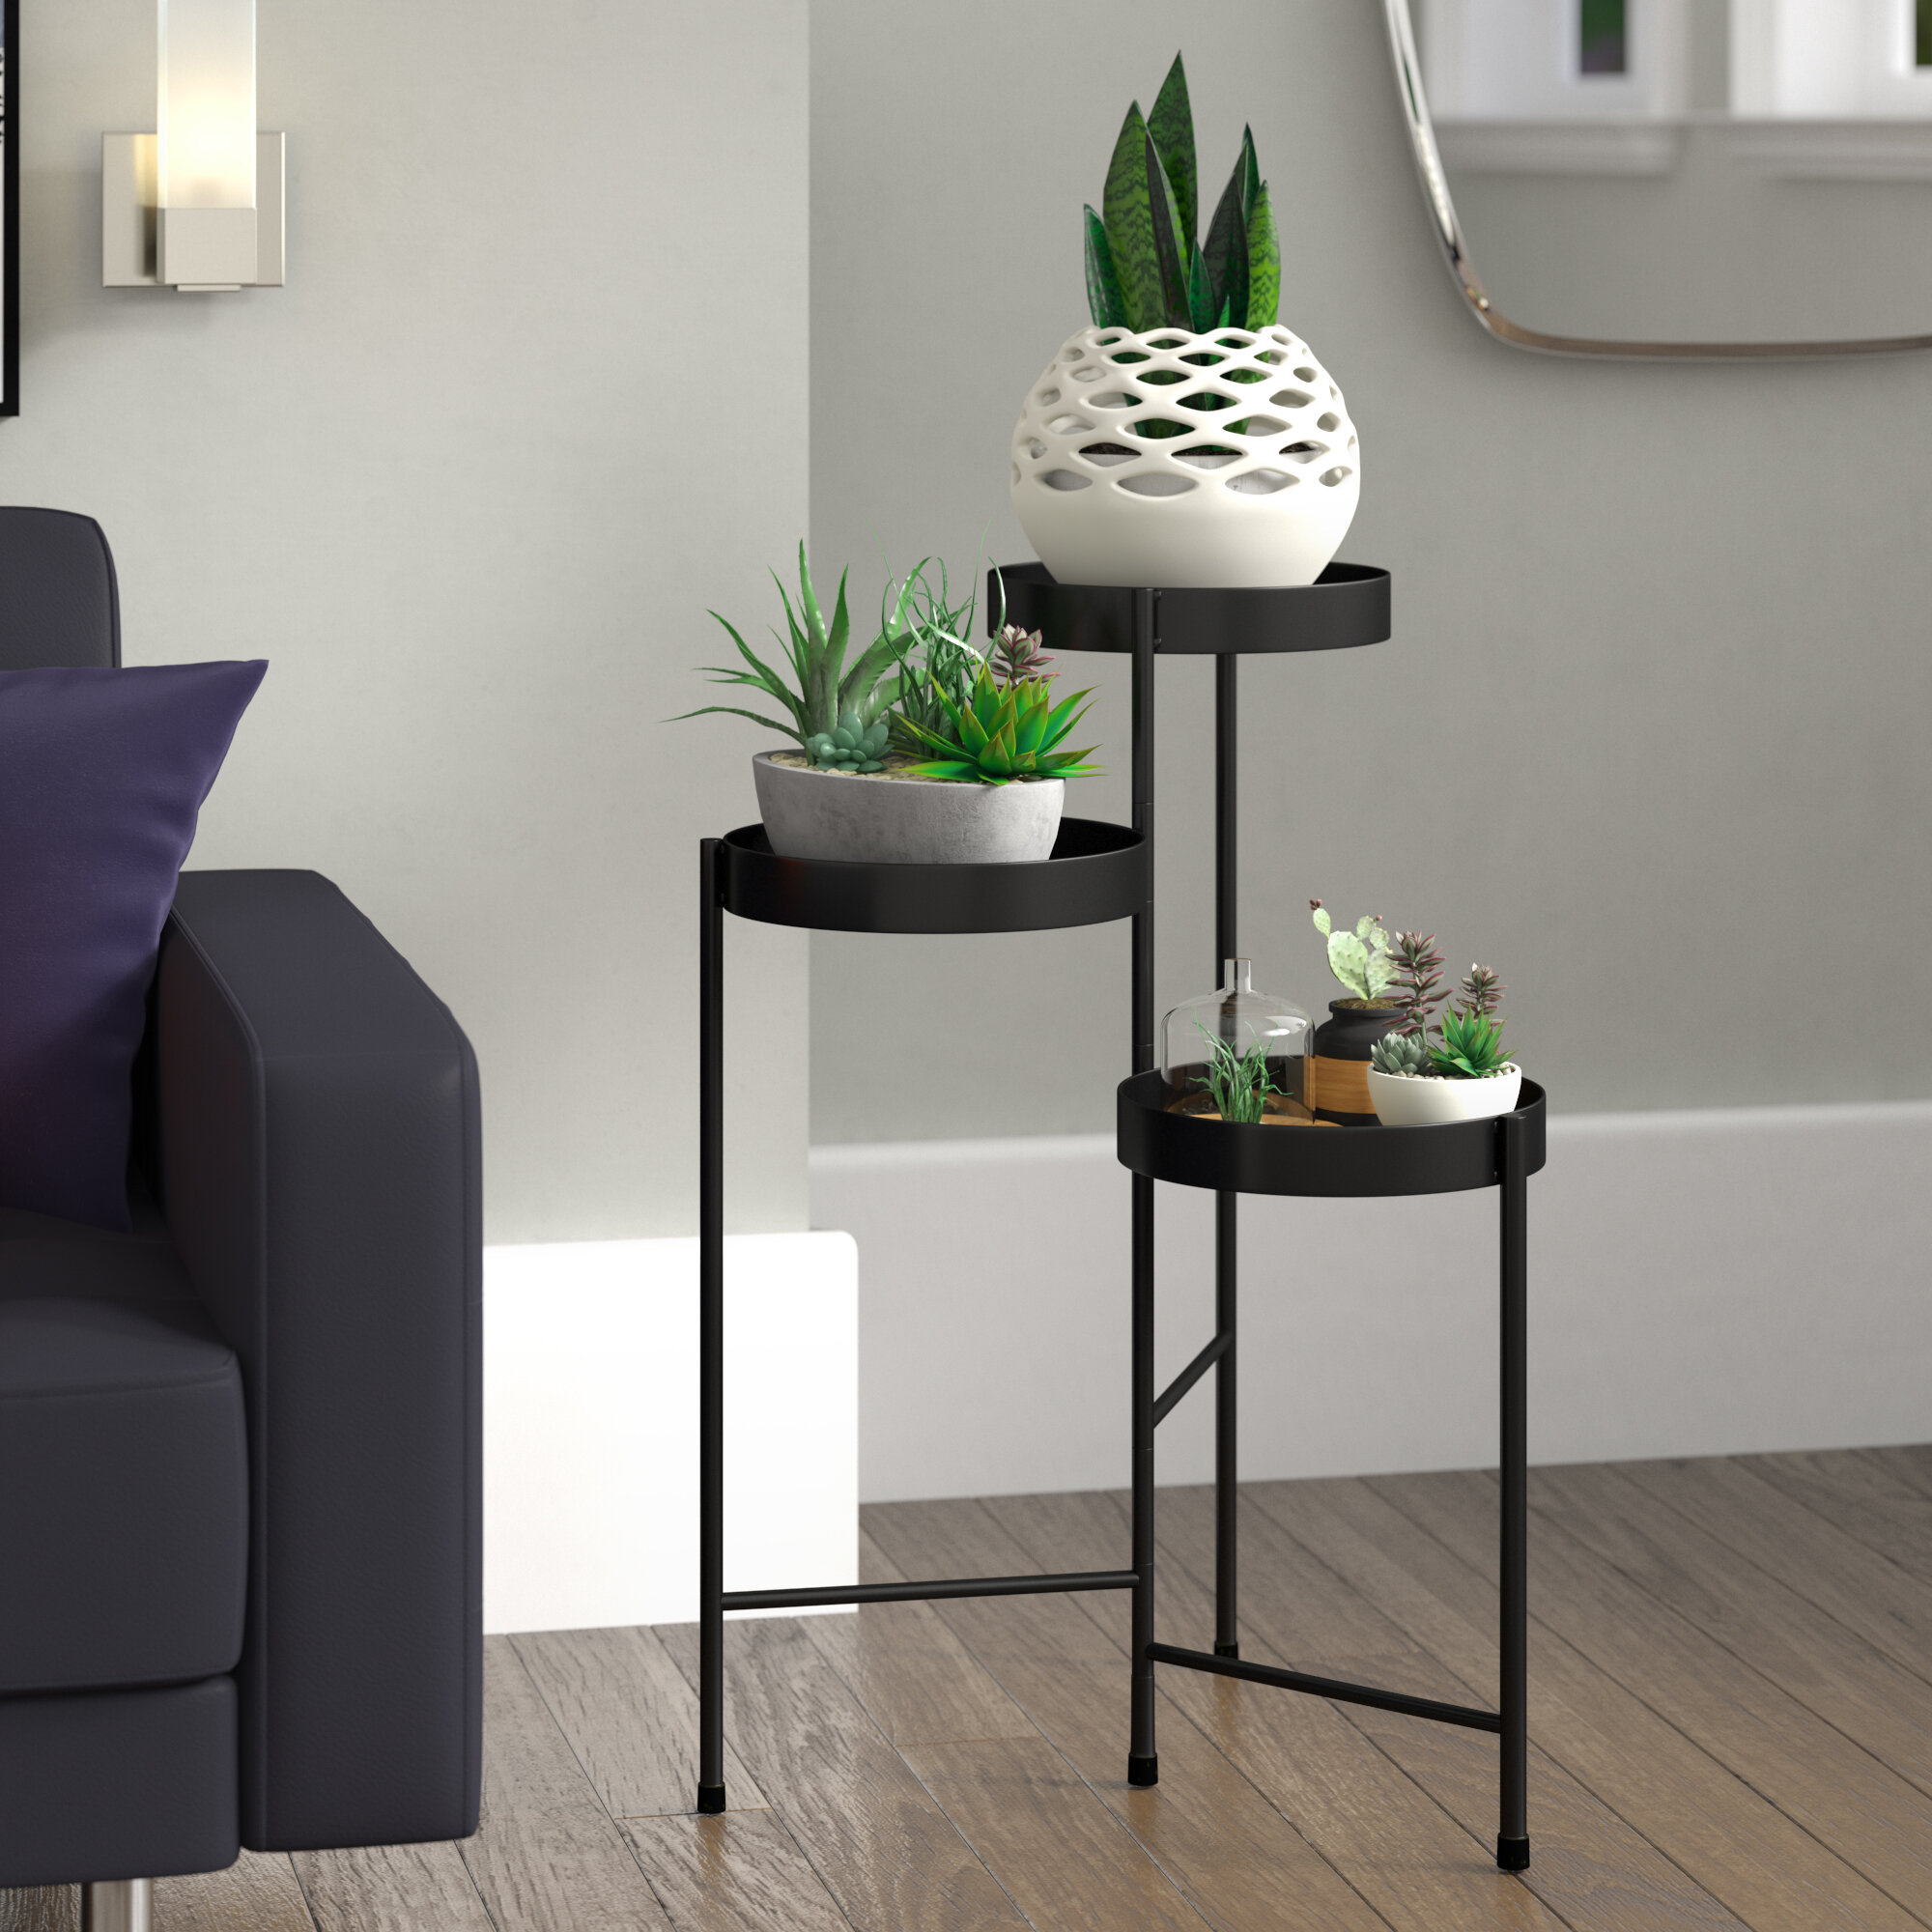 Etagere Plant Stands & Tables You'll Love